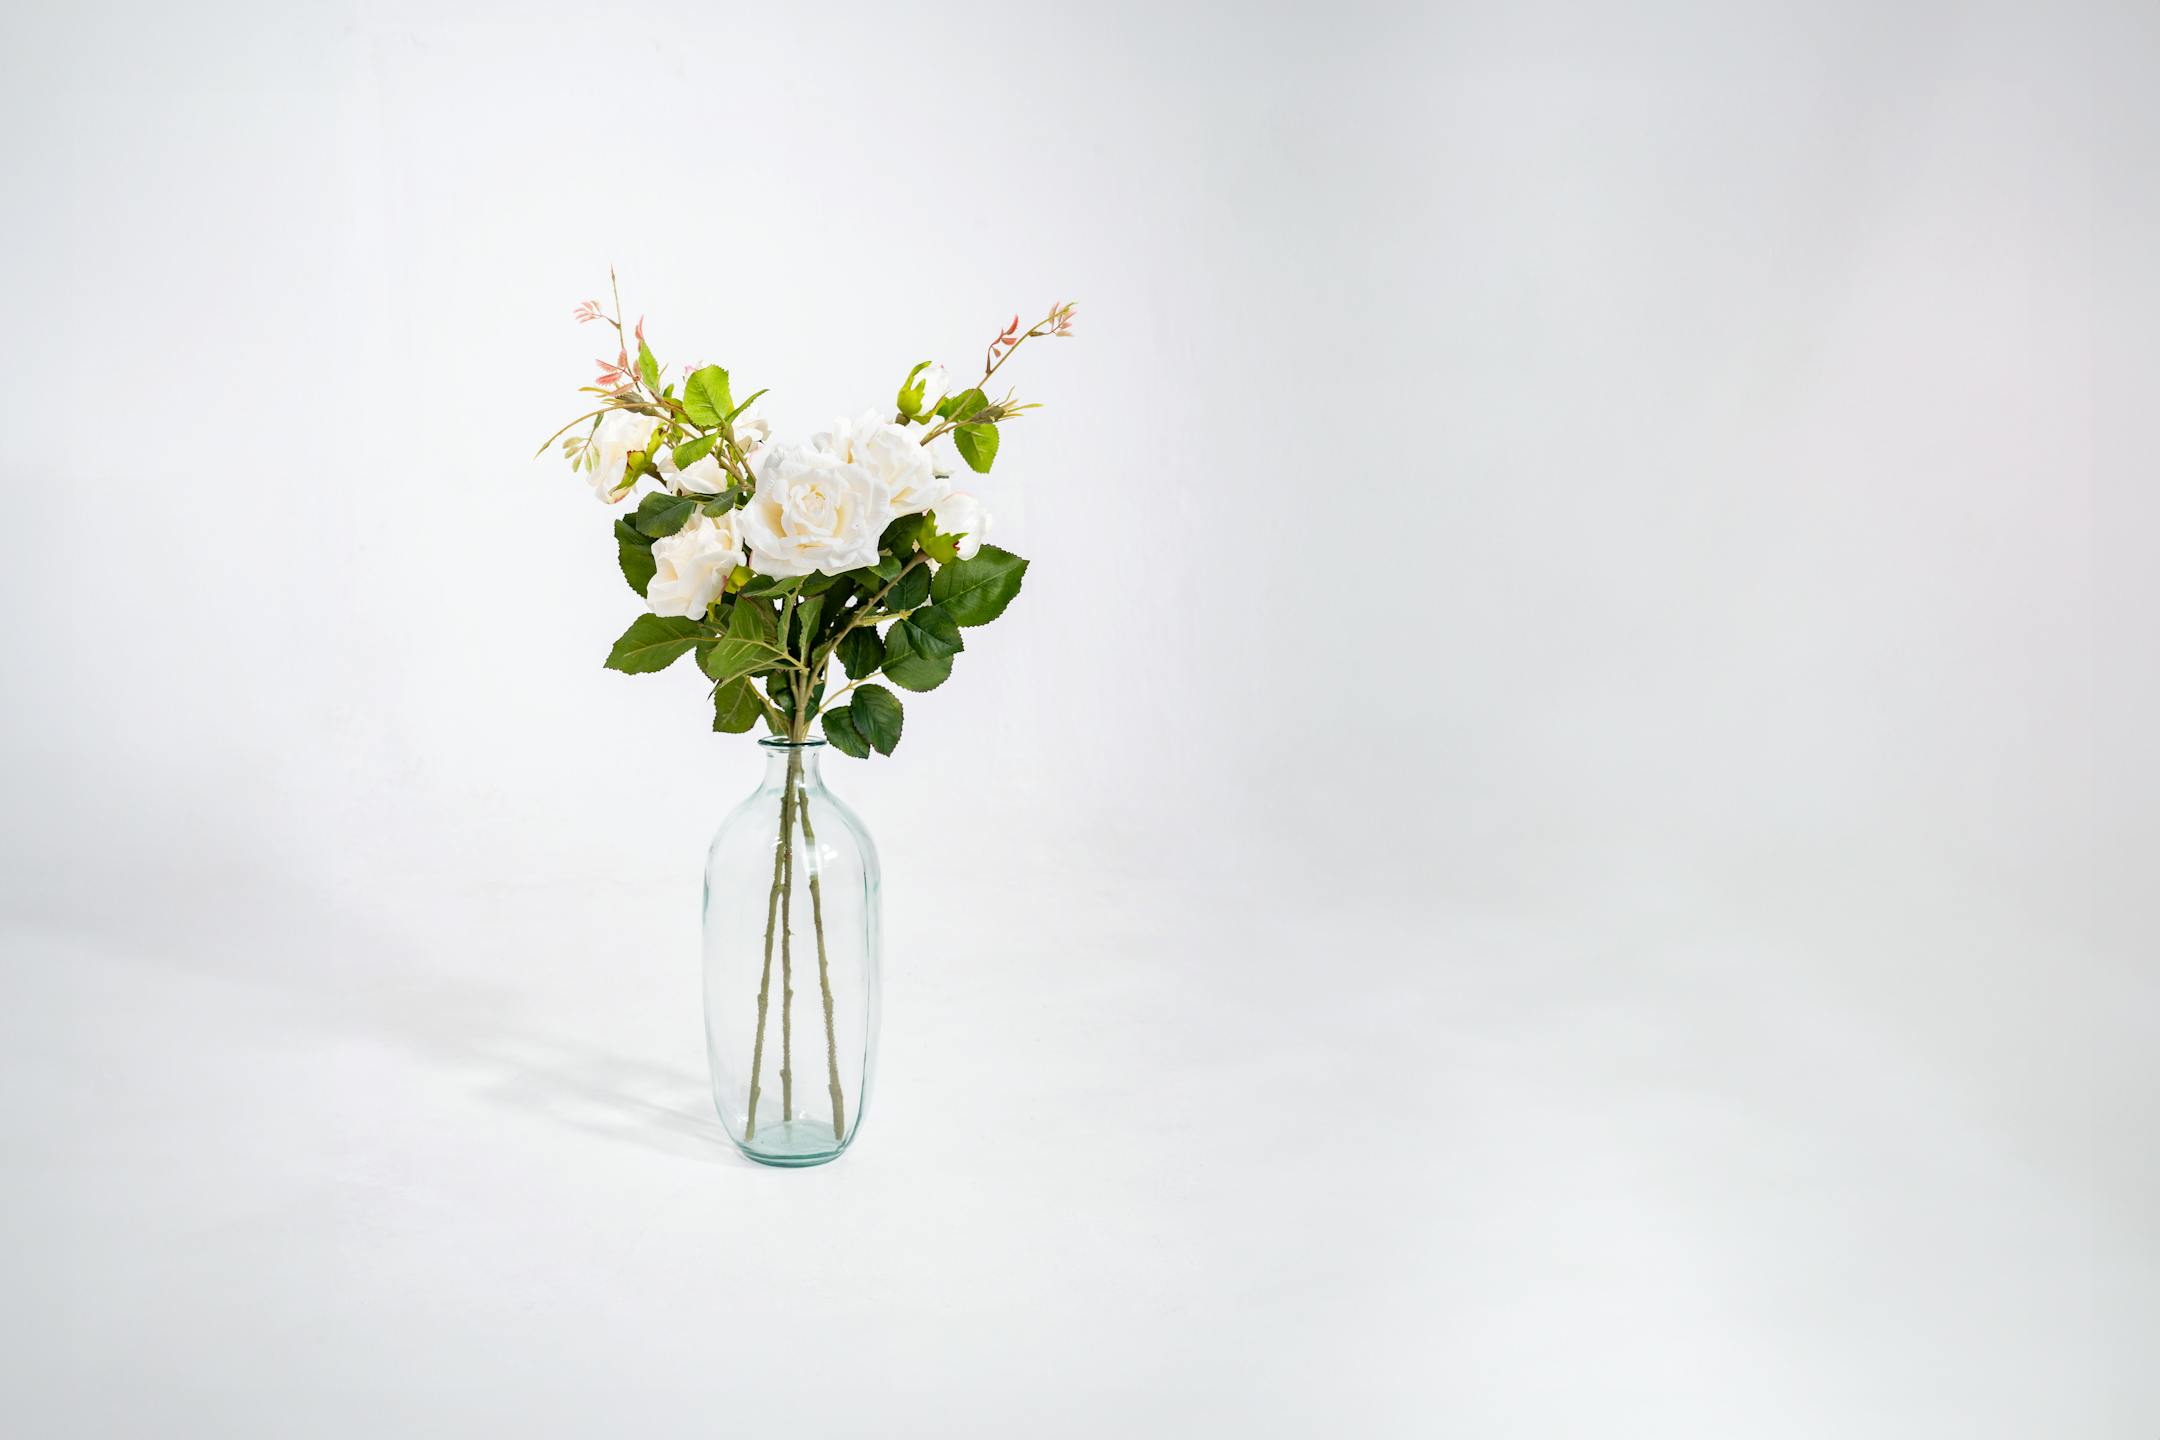 Three artificial wild rose stems in glass vase